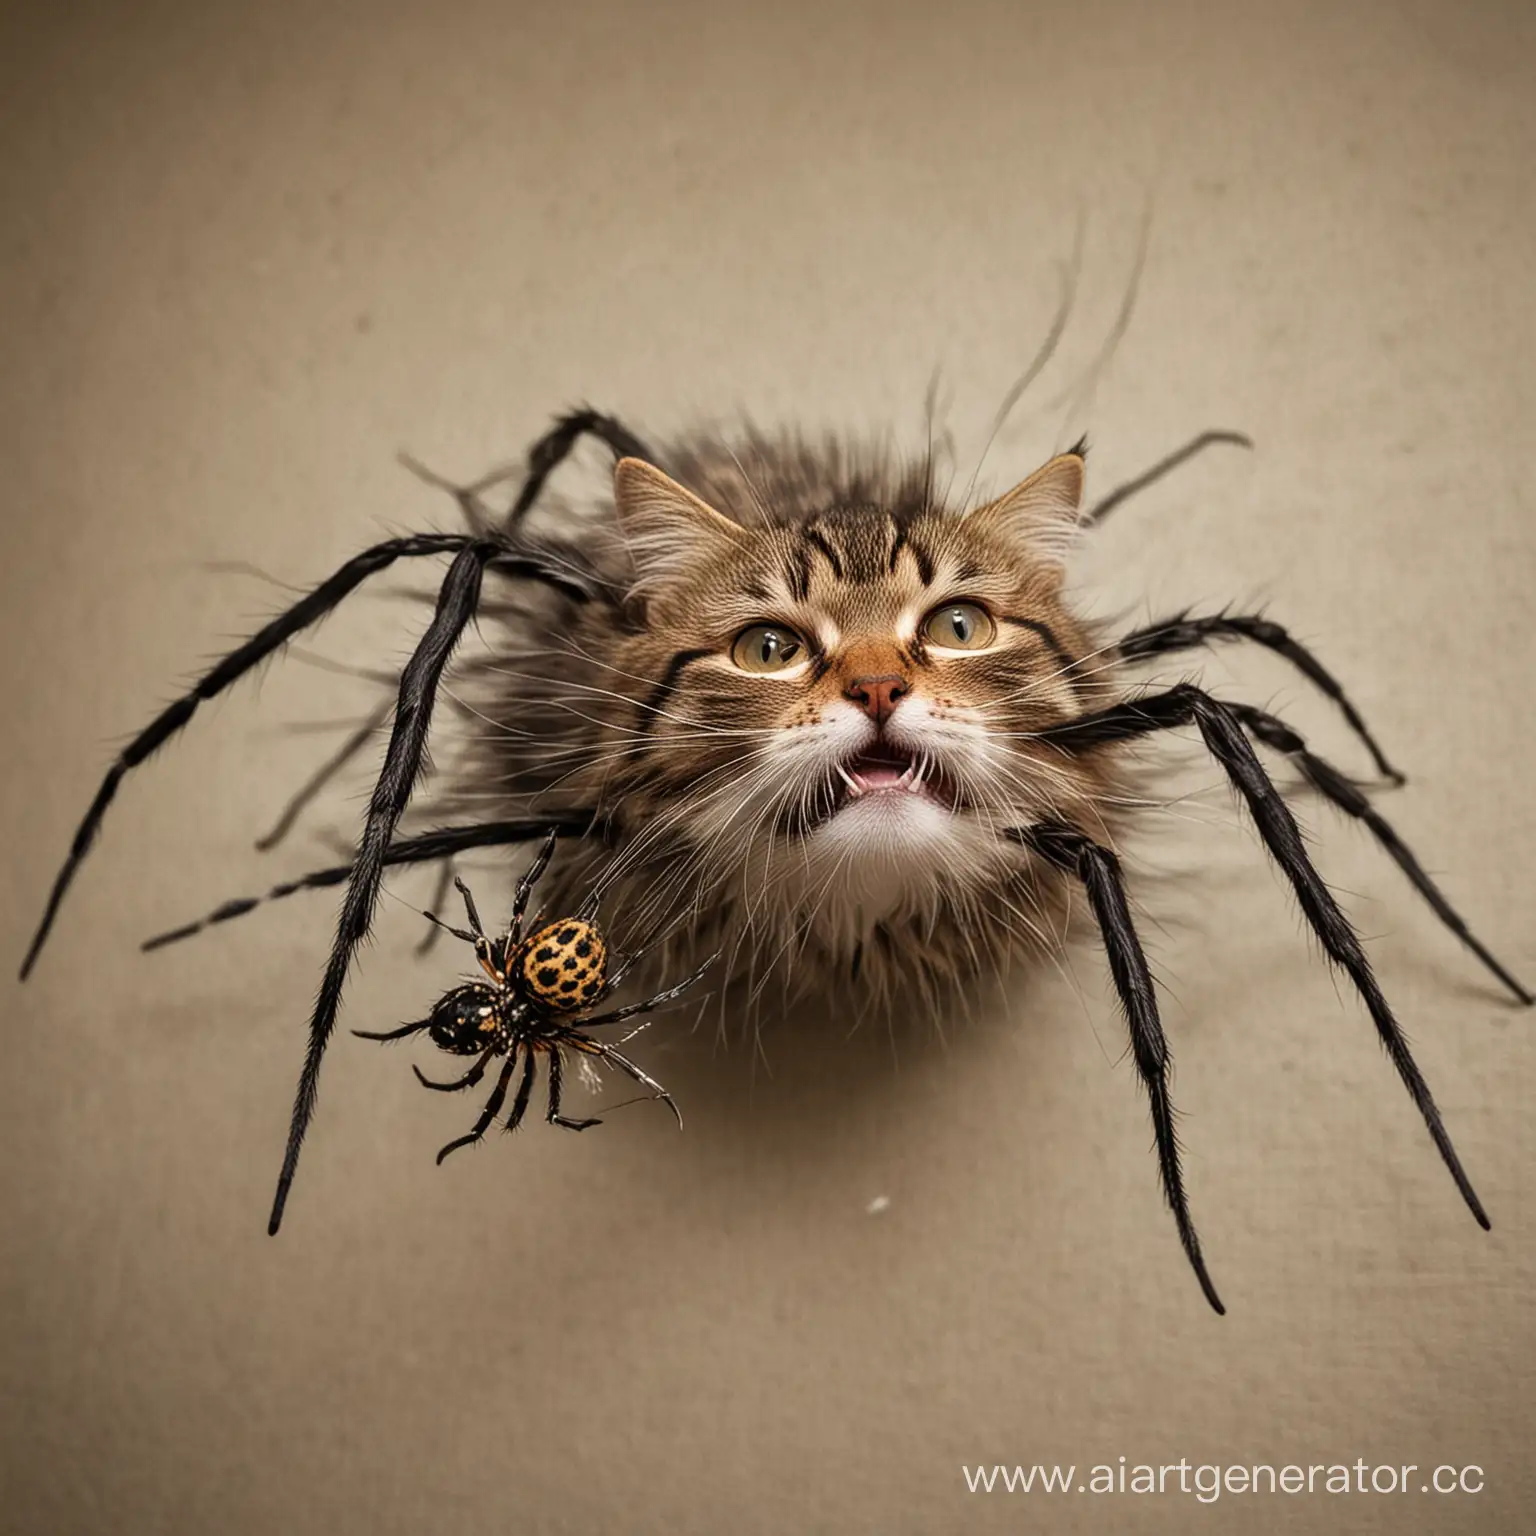 Spider-Eating-Cat-in-Dramatic-Encounter